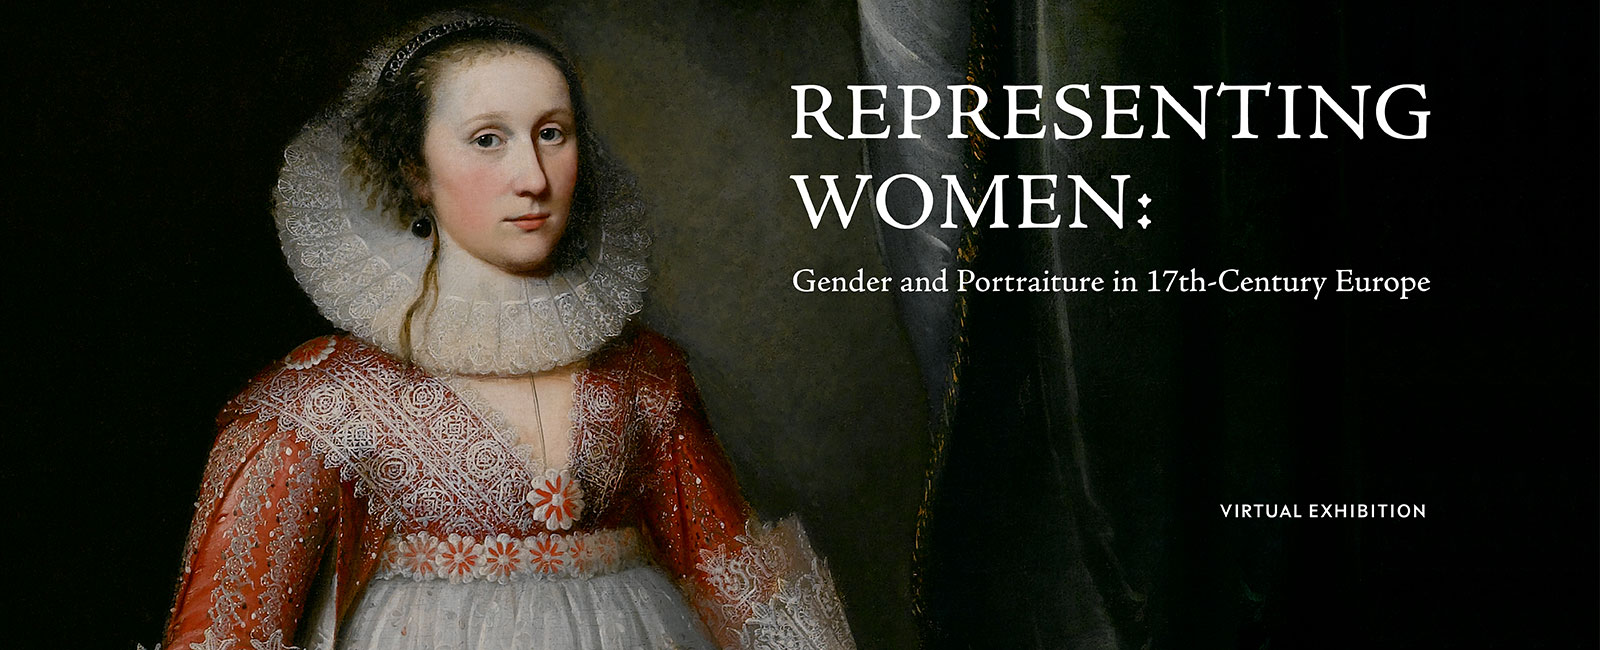 Representing Women: Gender and Portraiture in 17th-Century Europe banner